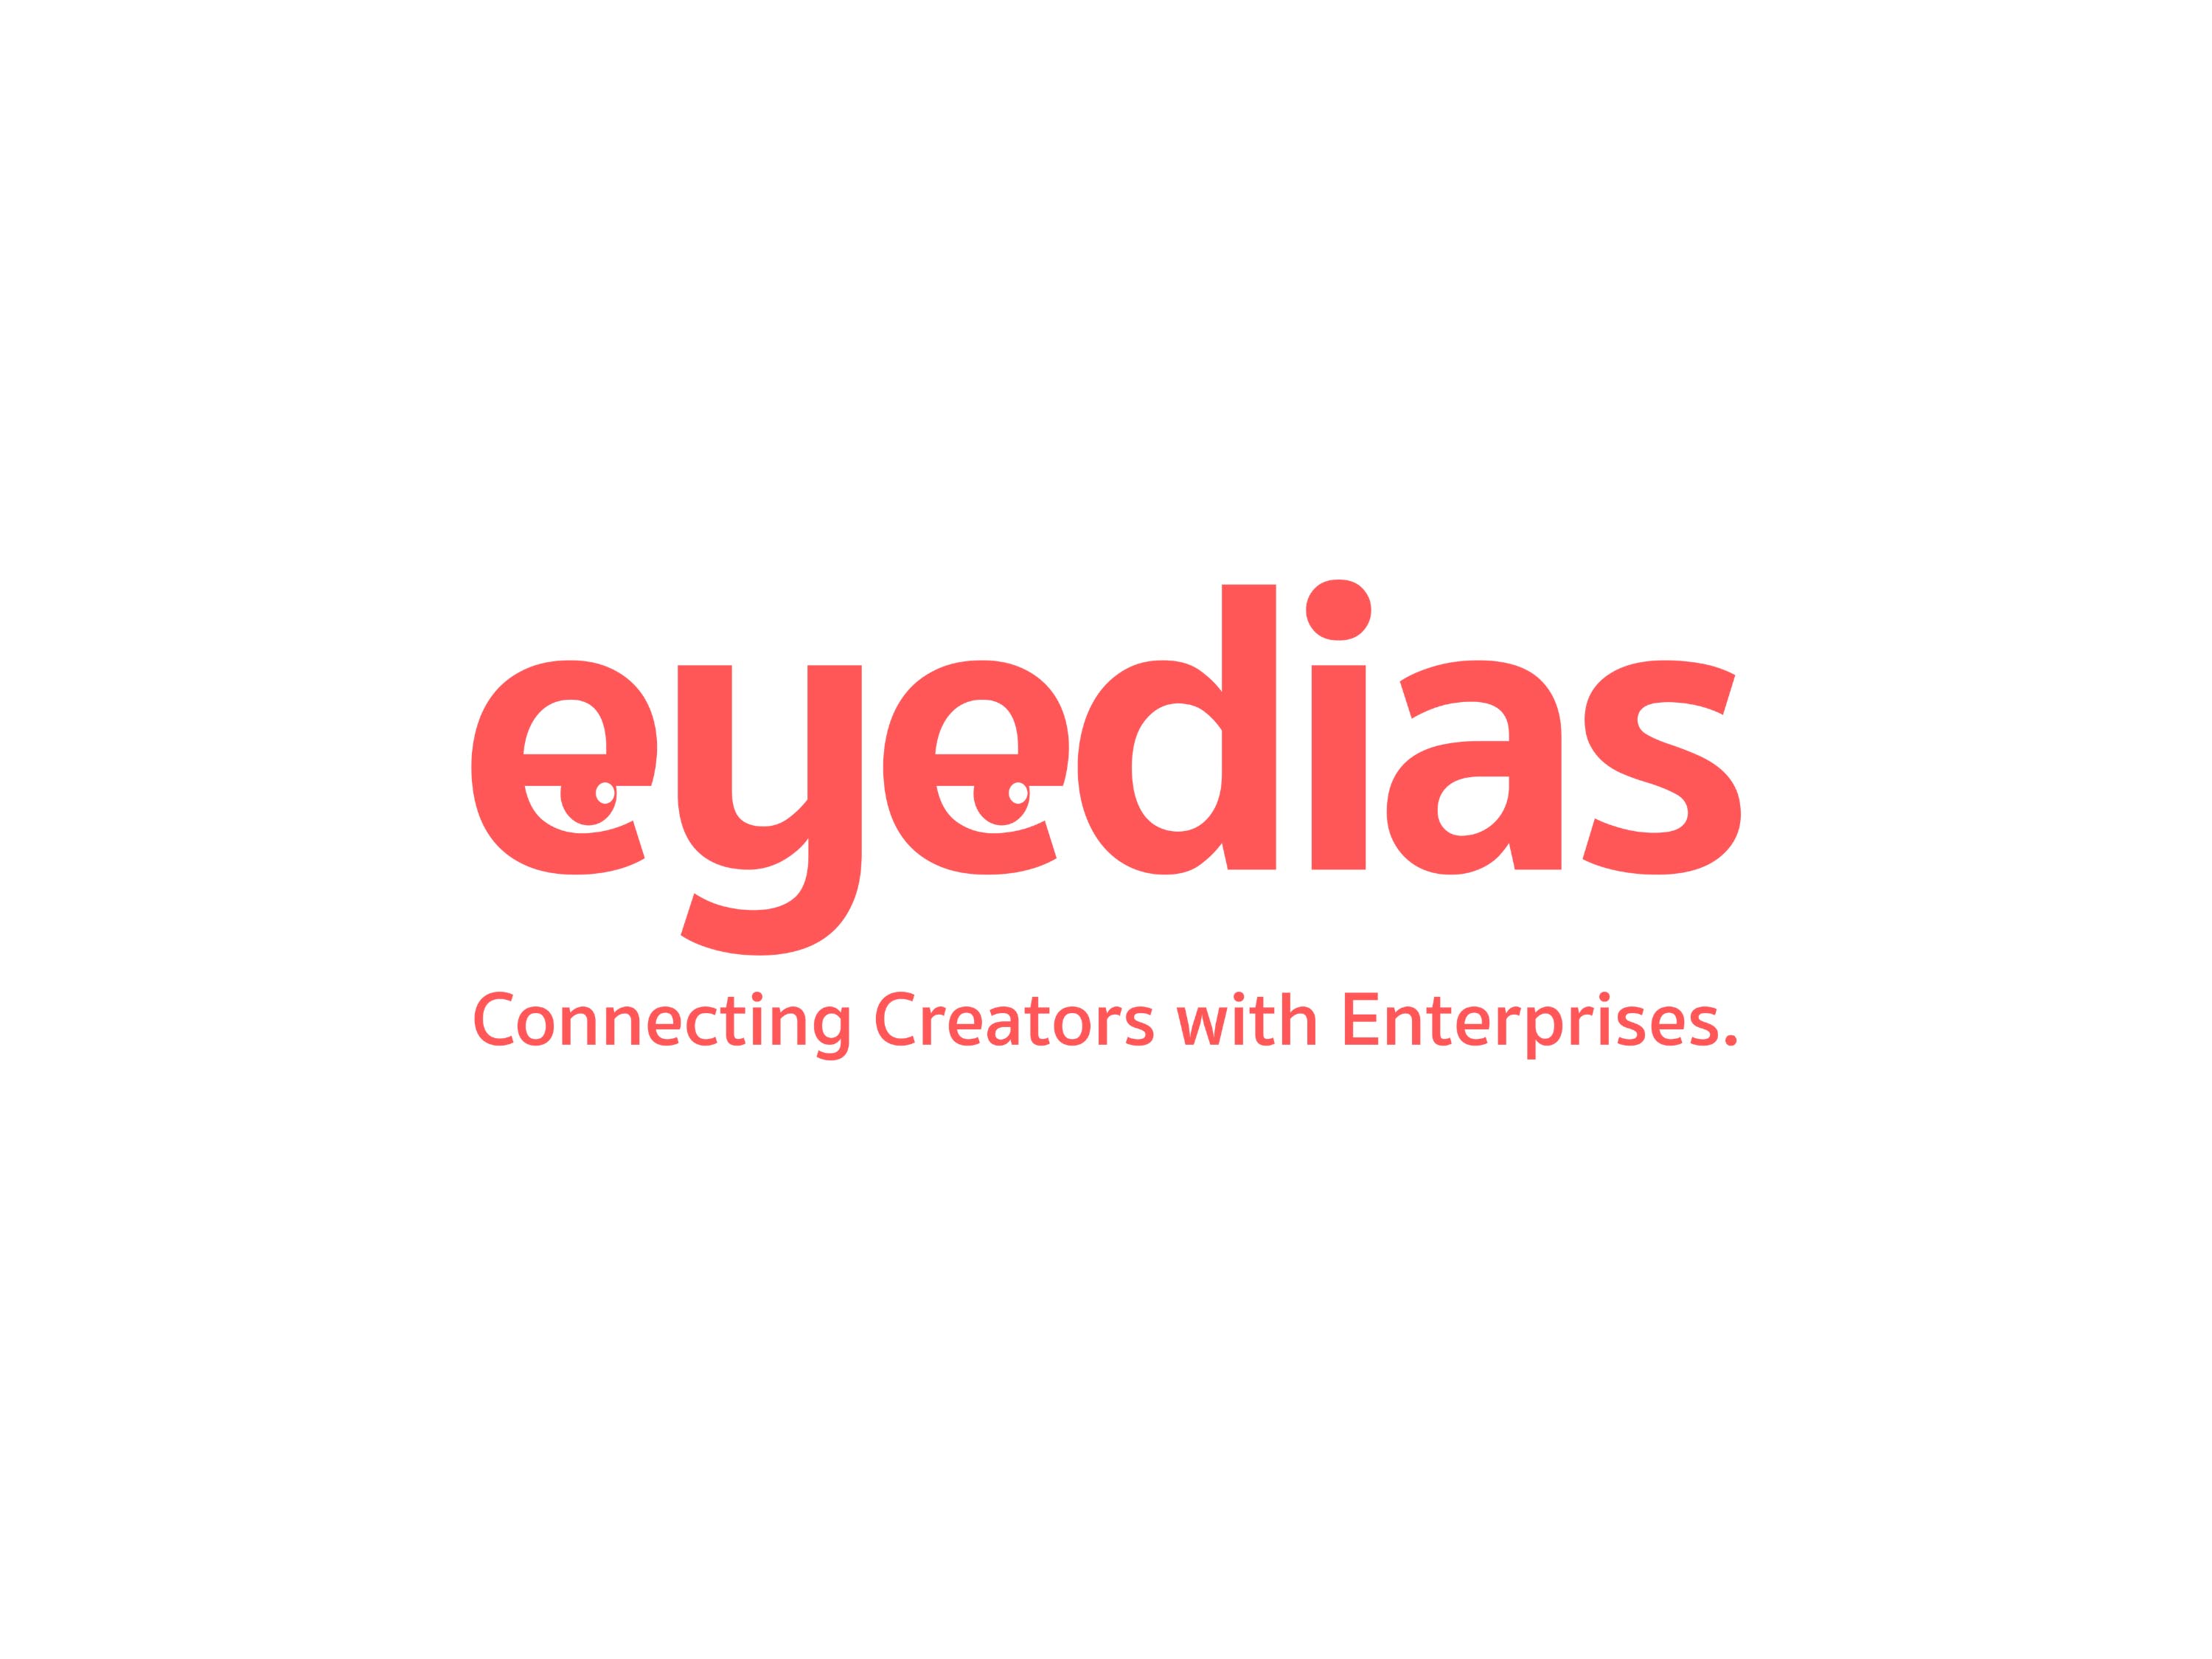 Connecting creators with enterprises through Eyedias, a new co-creation platform launched in Egypt